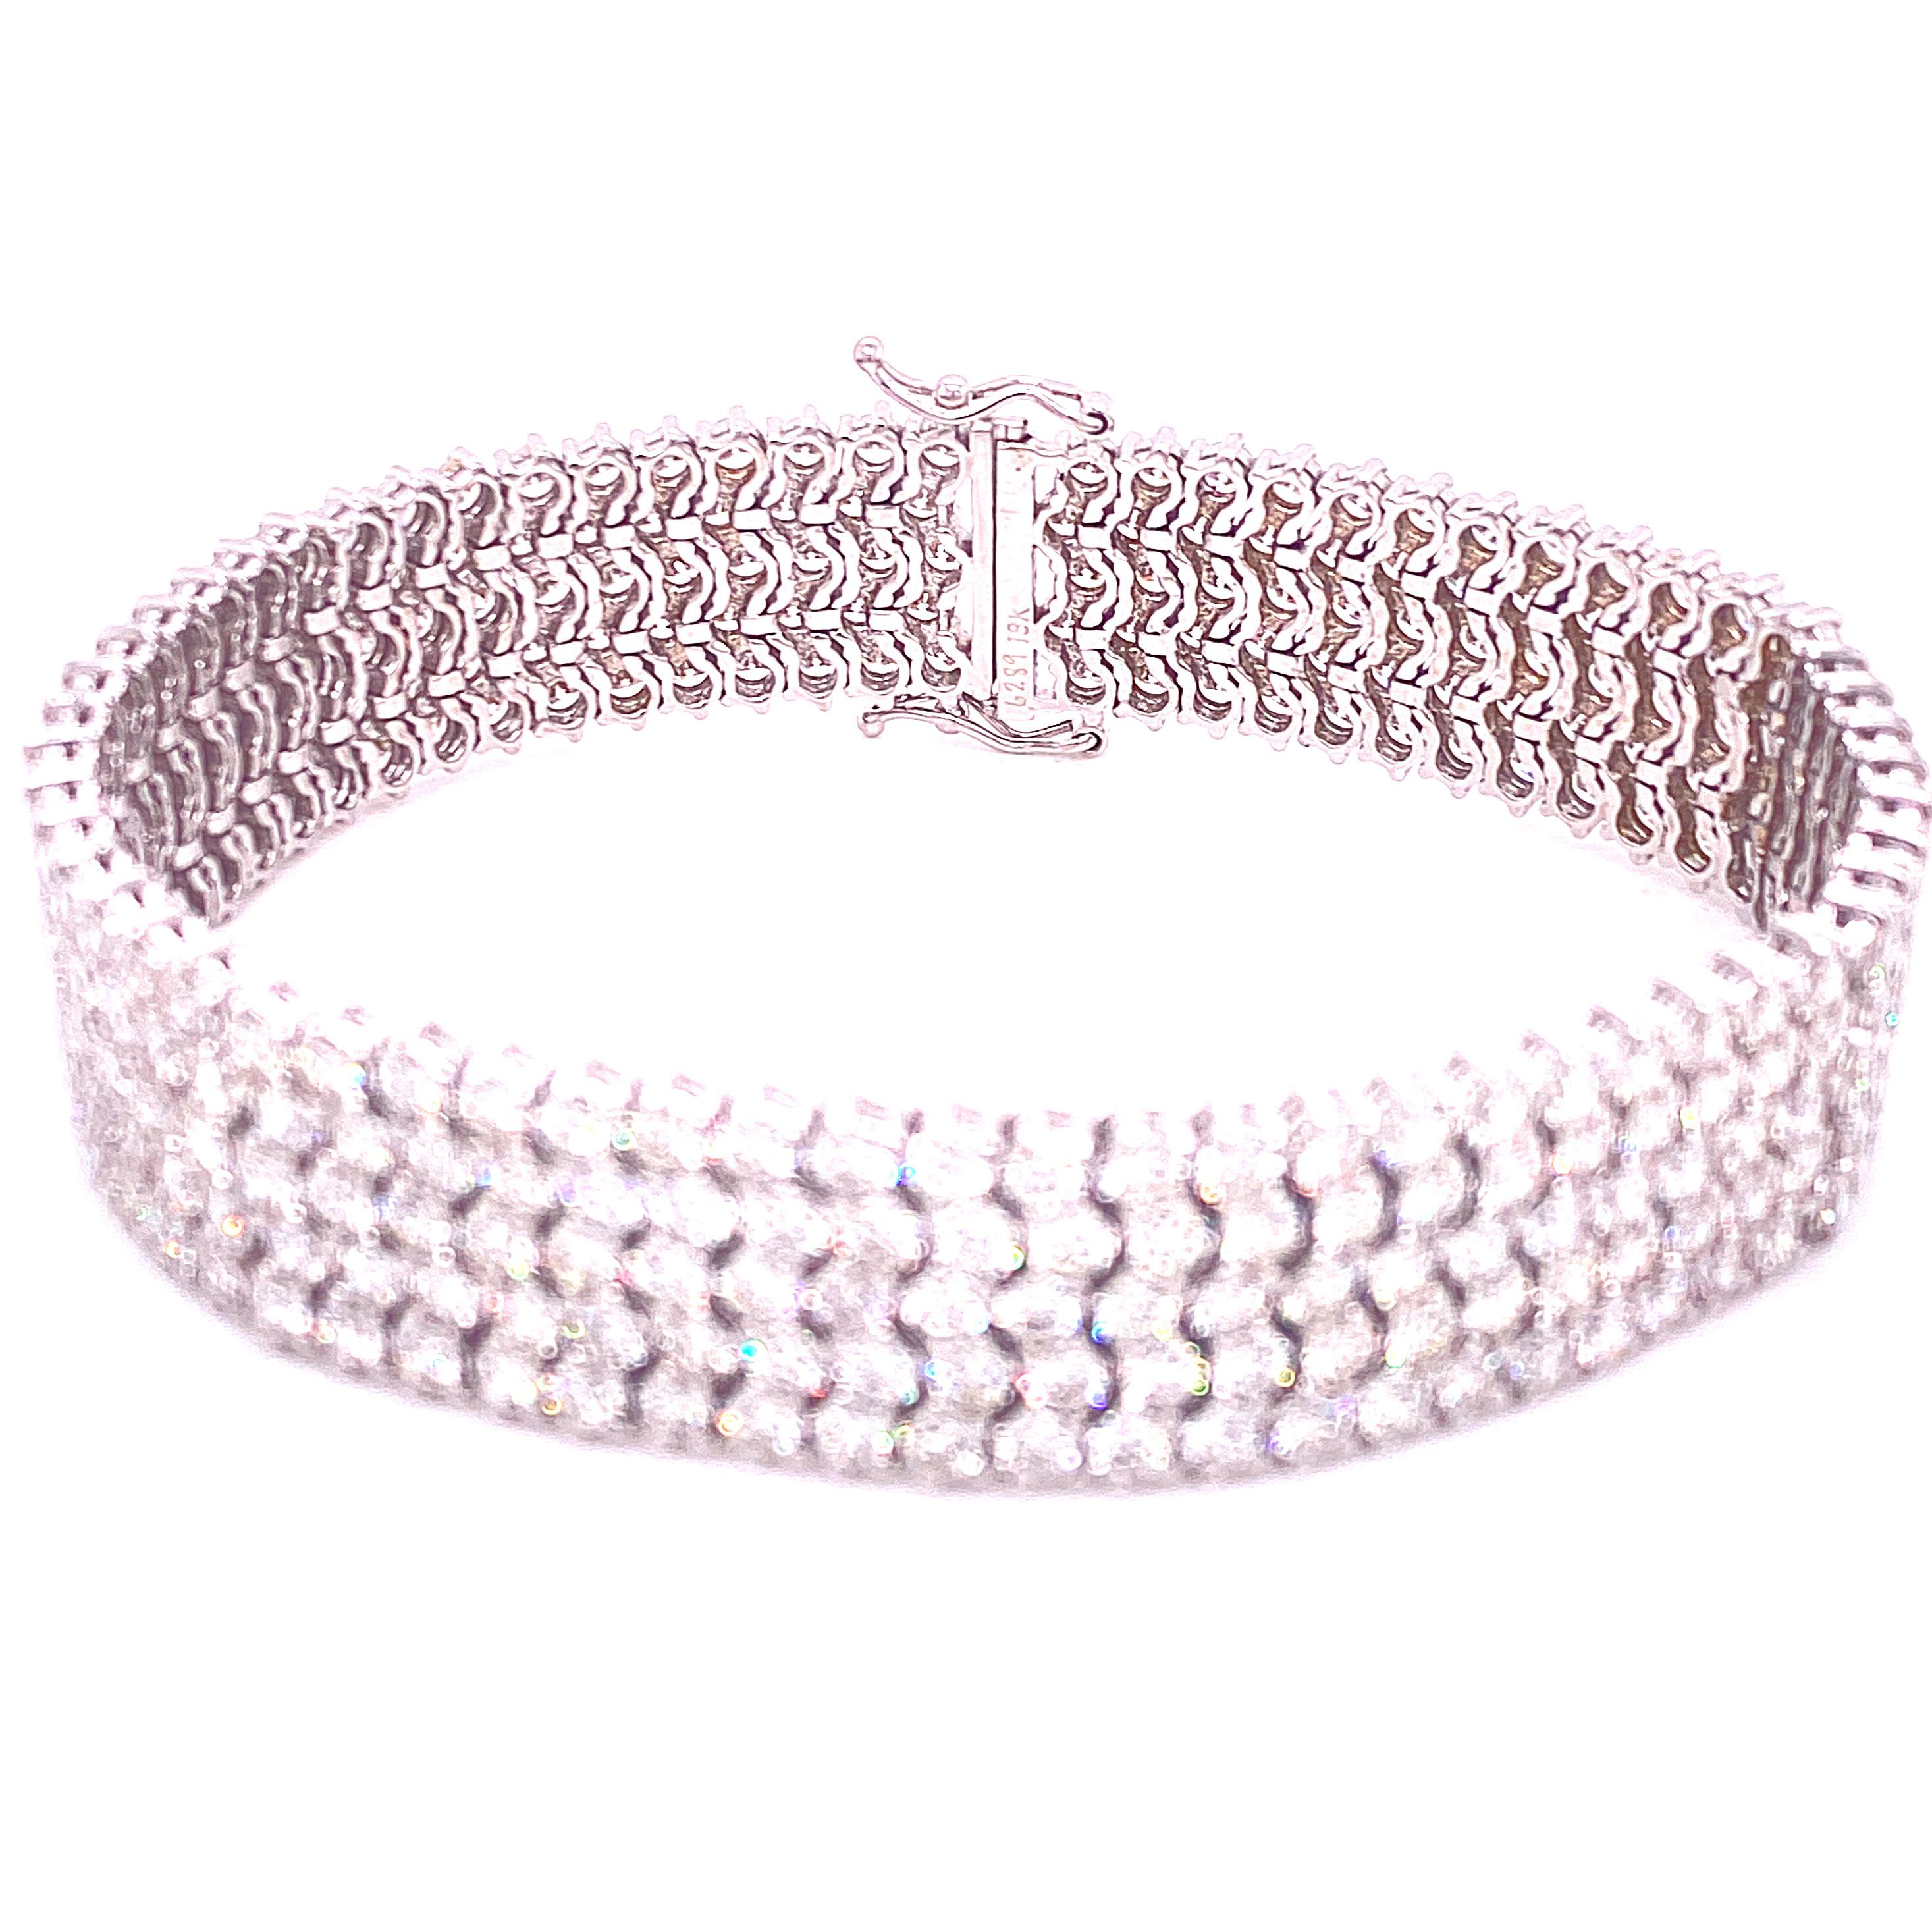 Glamorous five row diamond bracelet fashioned in 18 karat white gold. The shimmering round brilliant cut diamonds weigh 19.09 carats and are graded G-H color and VS-SI1 clarity. The bracelet is beautifully crafted with flexible links that lay